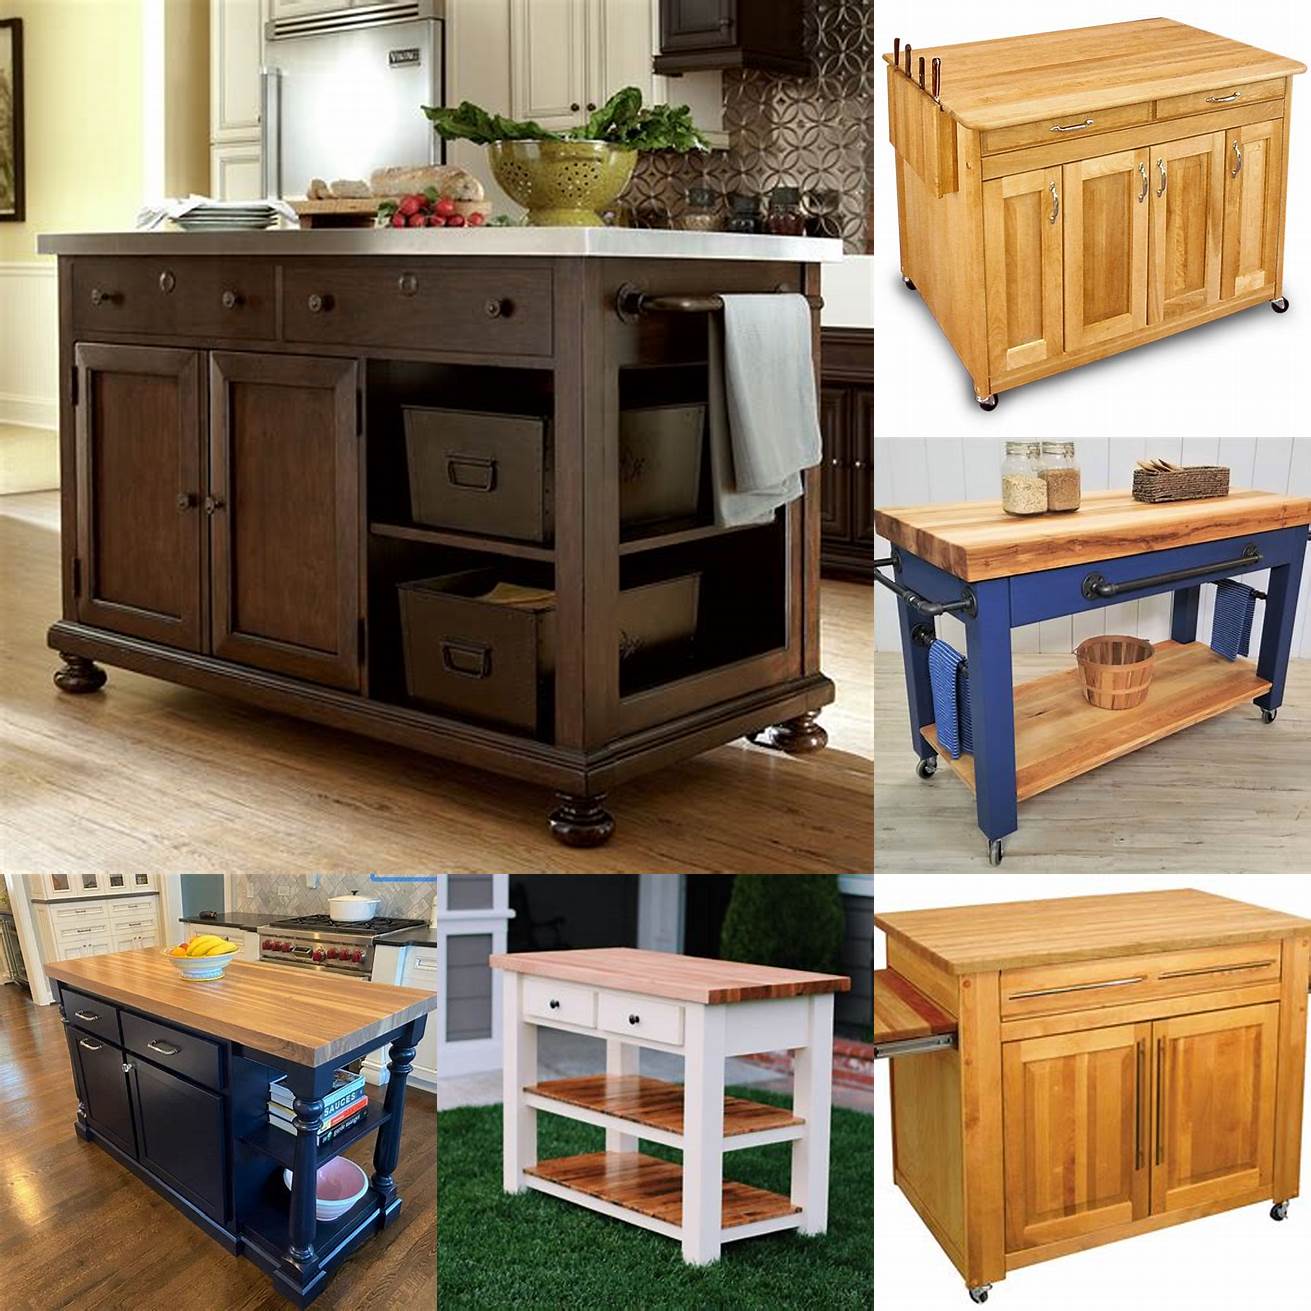 Portable kitchen island with butcher block top and open storage shelves